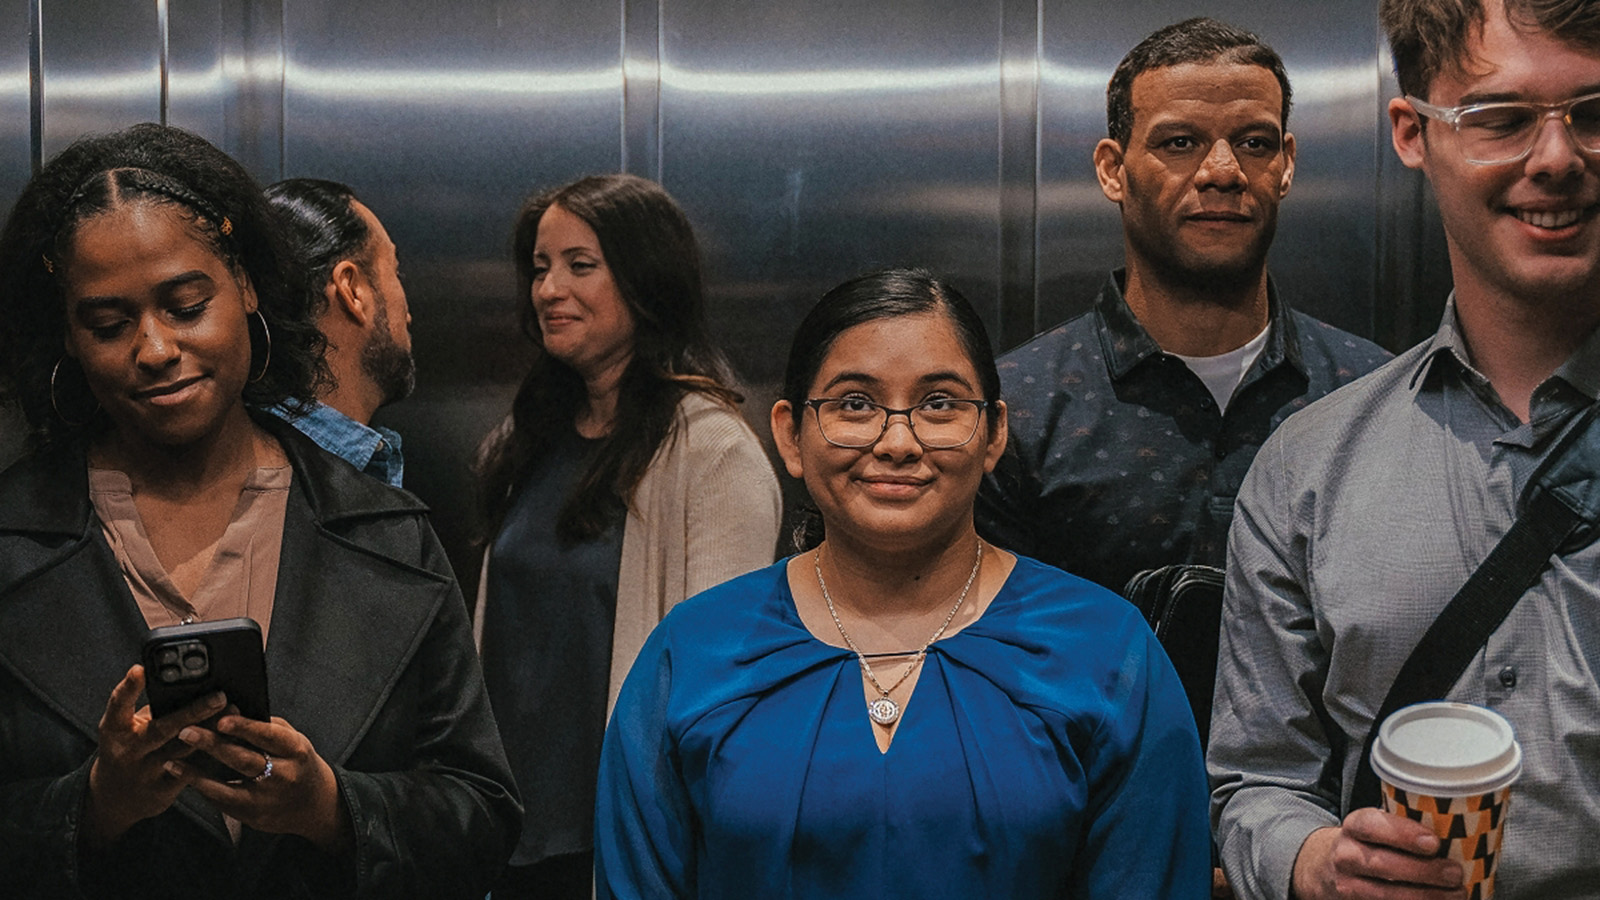 A diverse group of people in professional attire inside an elevator, with one person smiling at the camera while another looks at a smartphone.